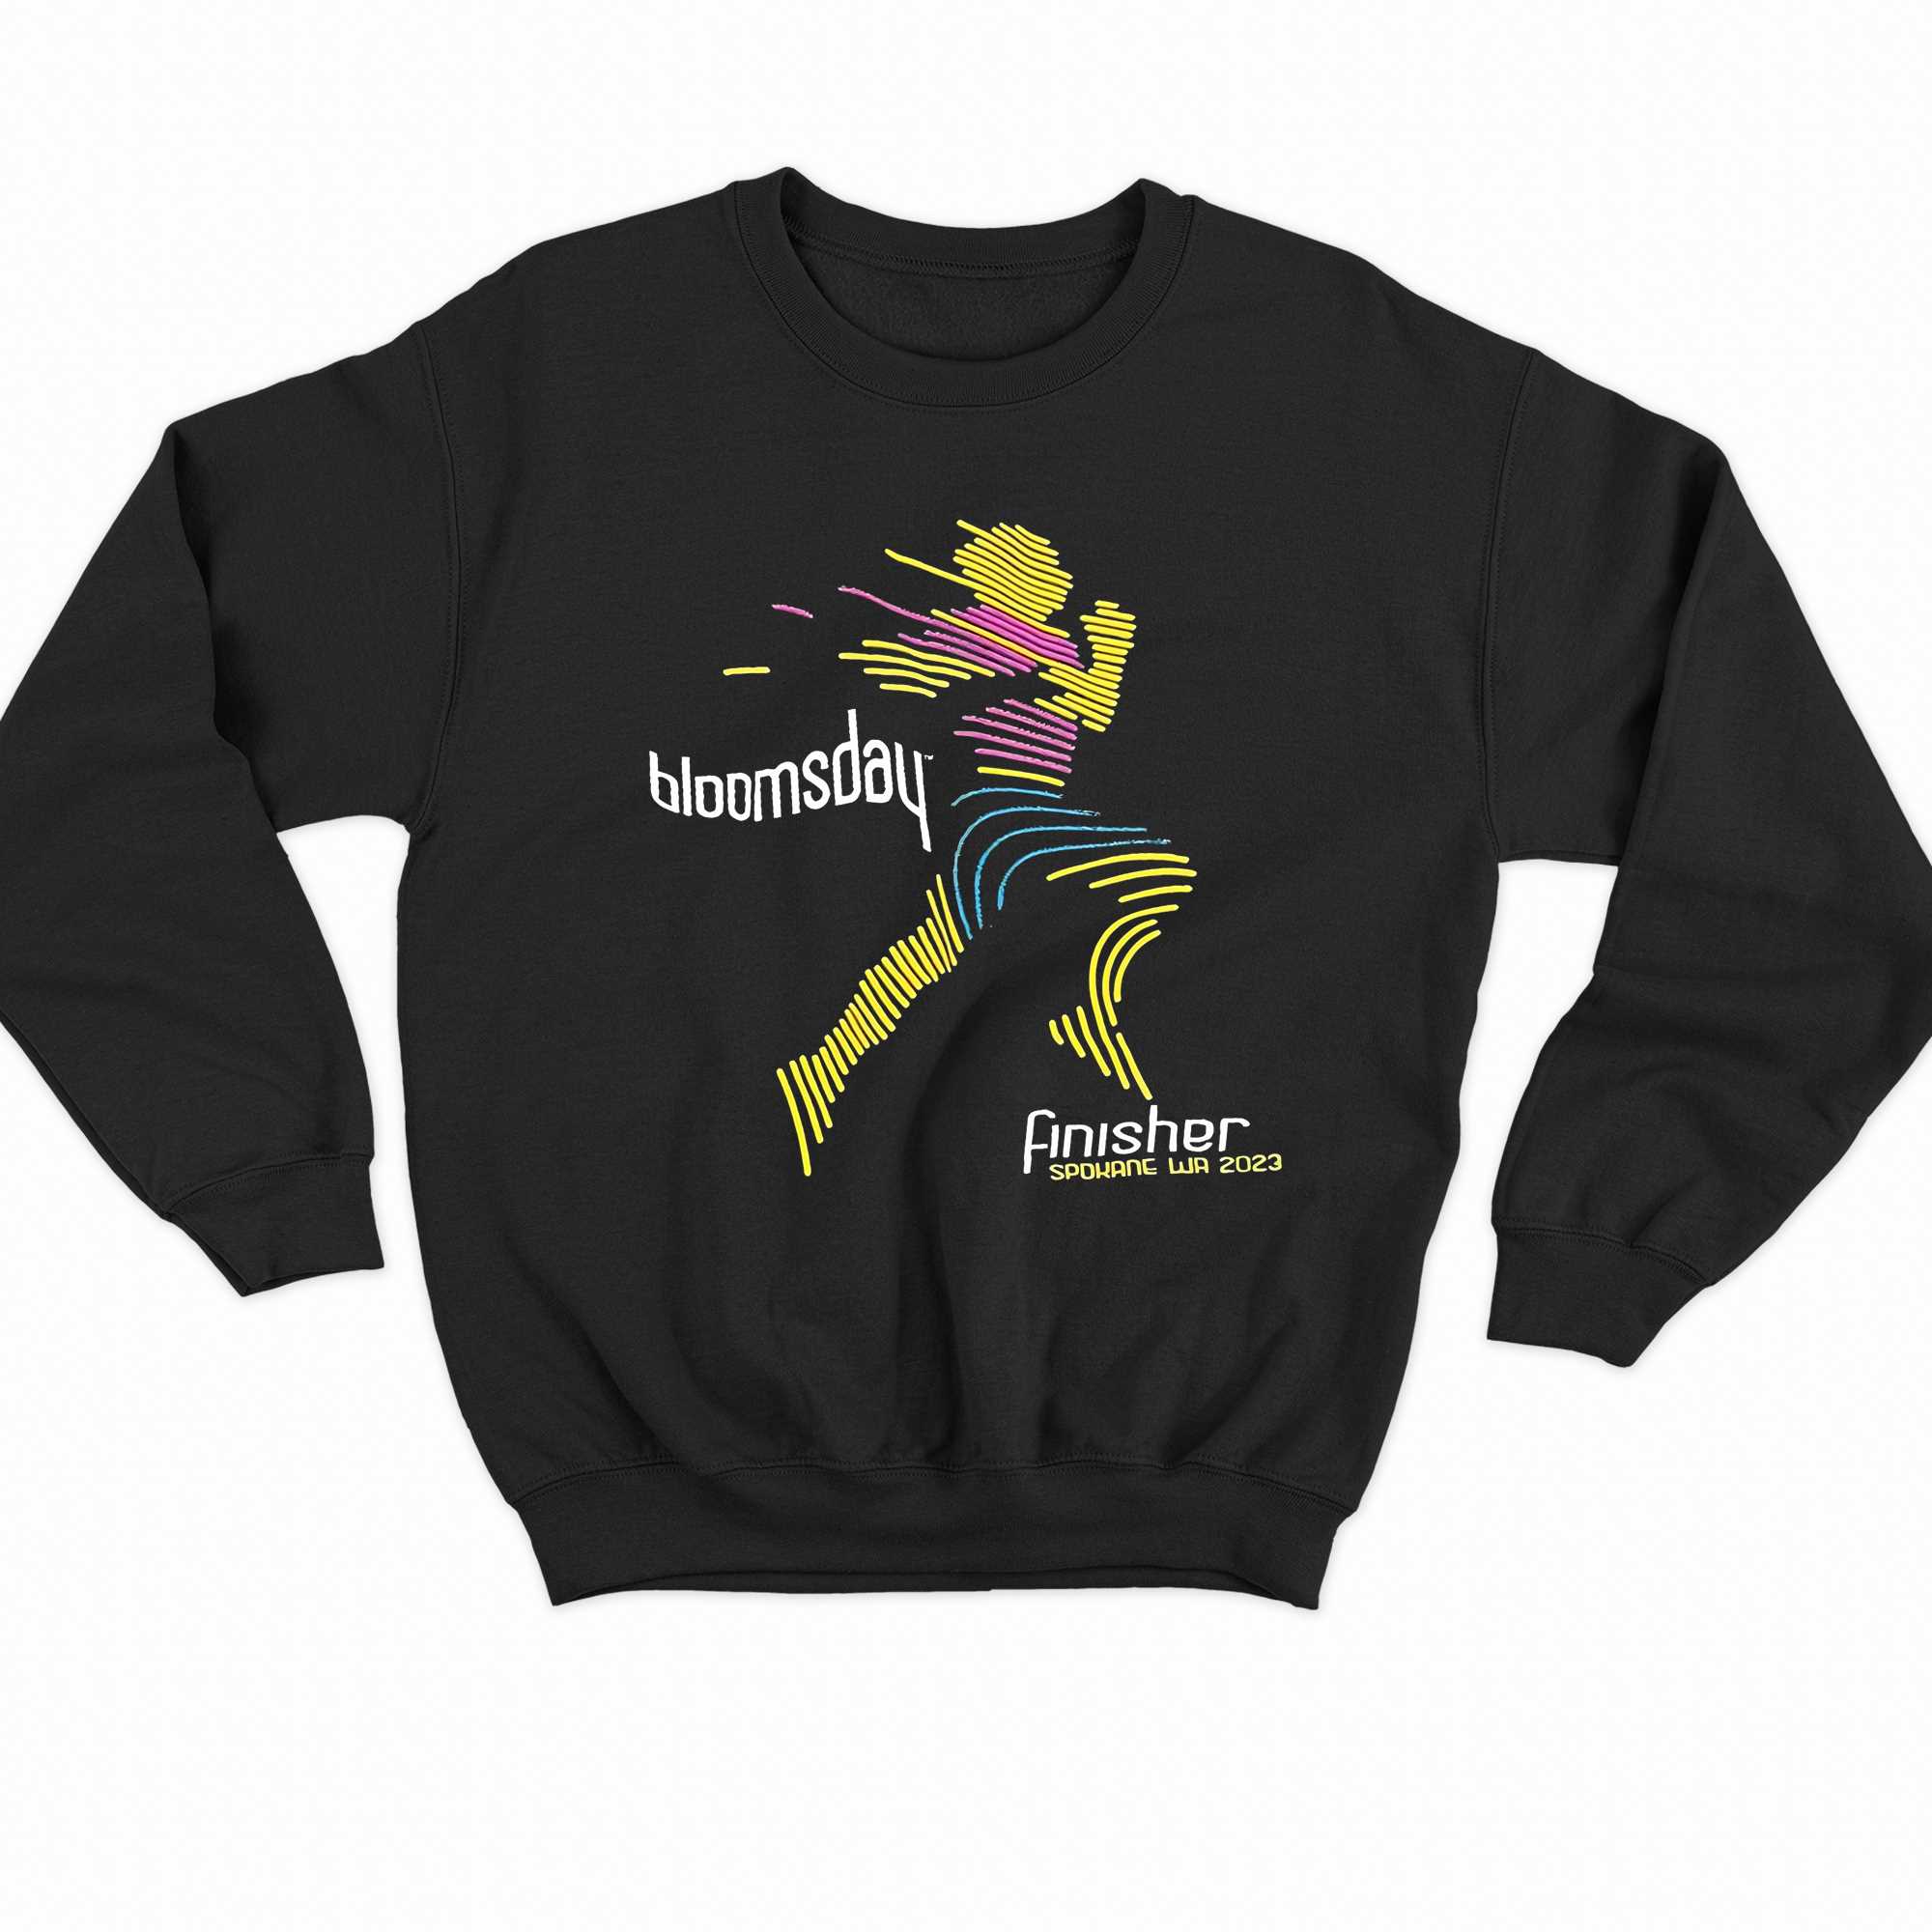 Official Bloomsday 2023 Finisher Shirt 